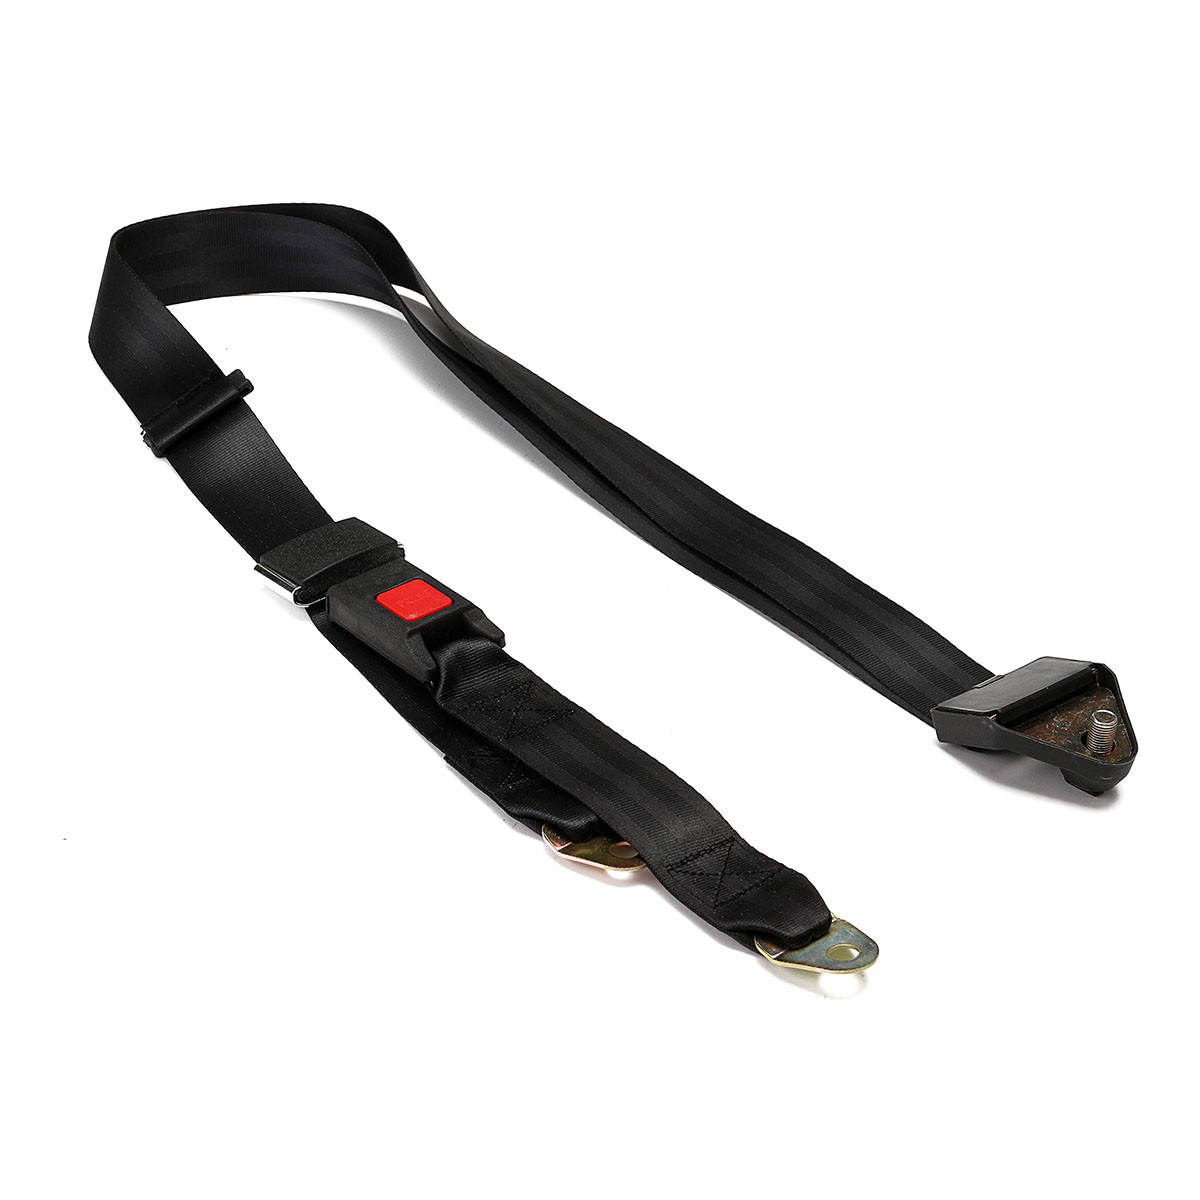 3-Point-Black-Safety-Seat-Belt-For-Racing-Karting-Go-Kart-Parts-Cart-Auto-Car-1116681